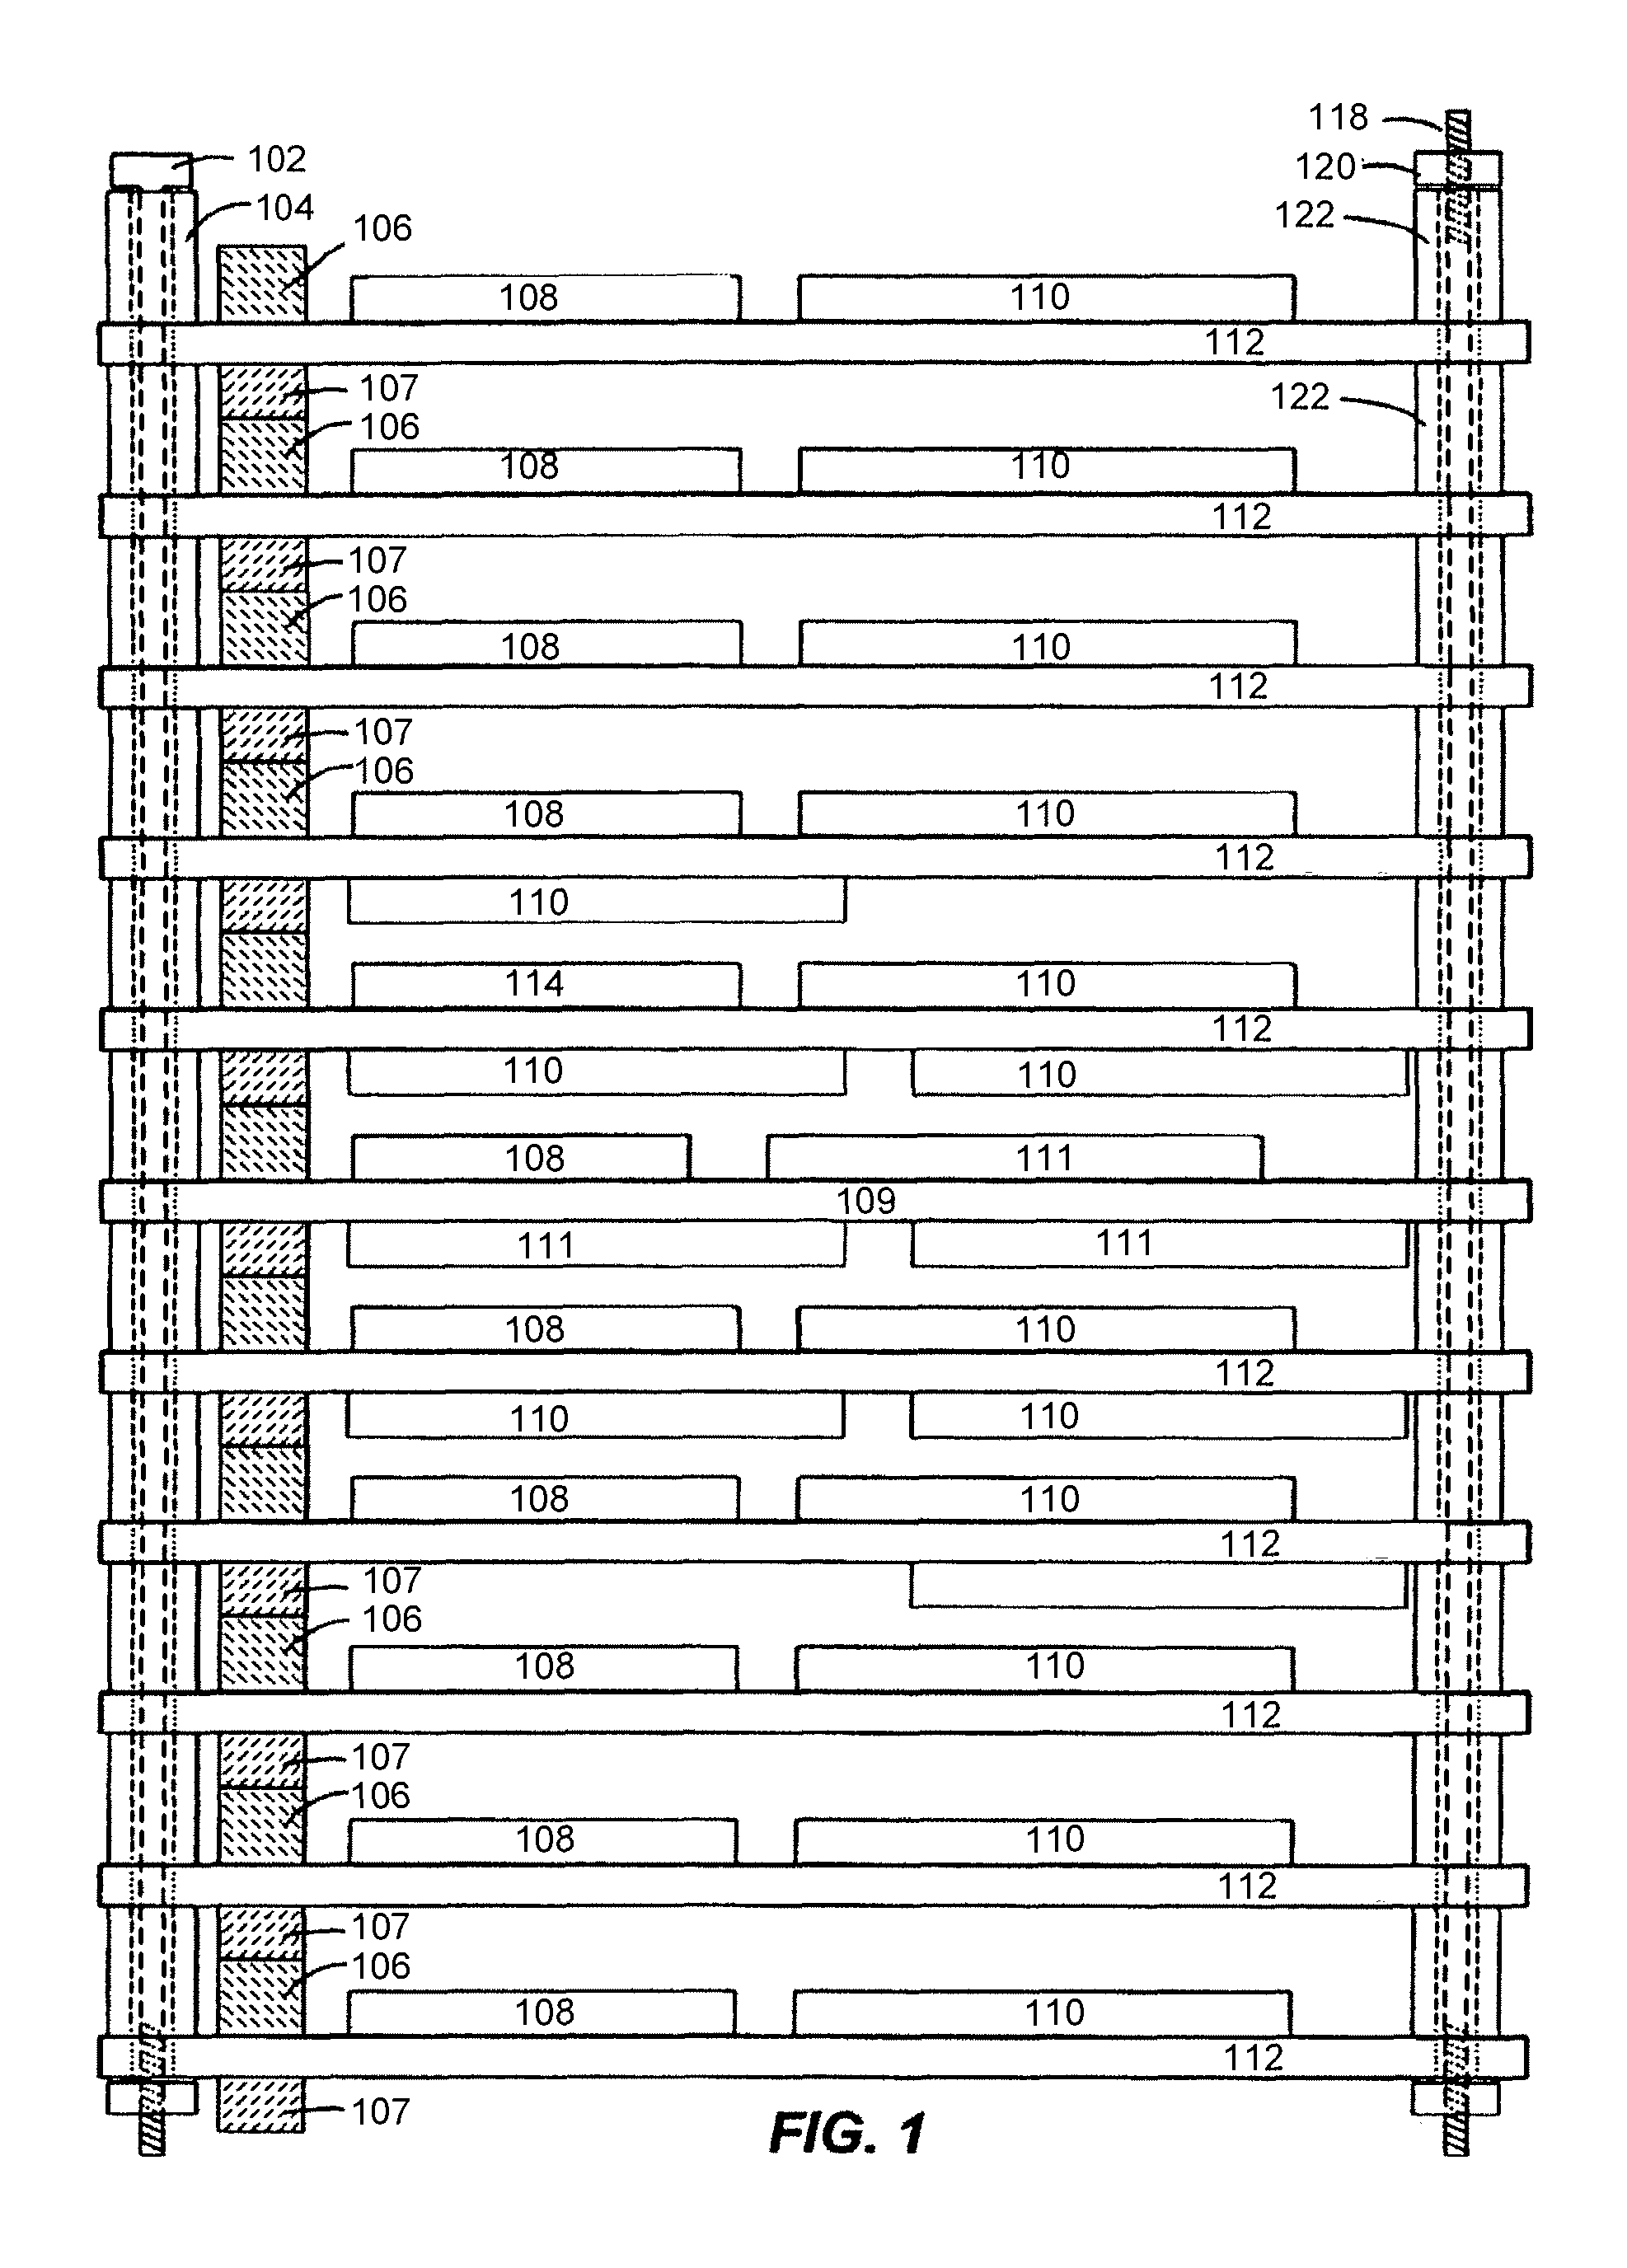 Methods and systems stackable circuit boards